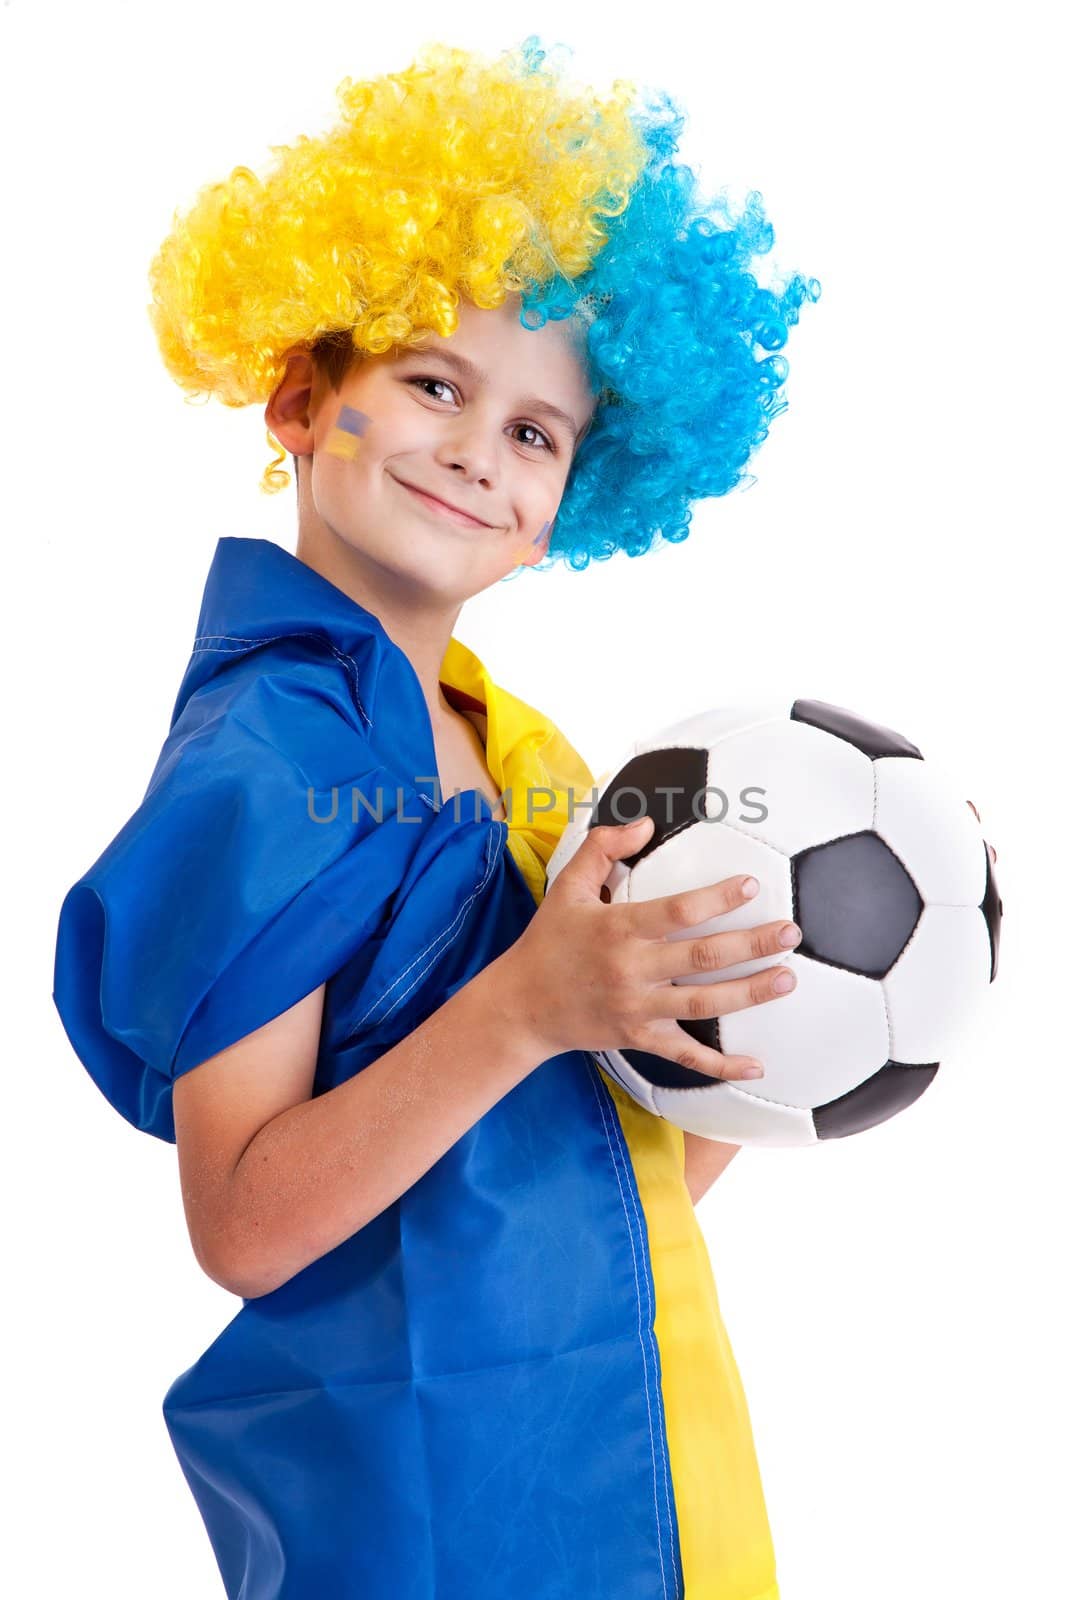 Football fan with a blue and yellow ukrainian flag painted on his face on white background